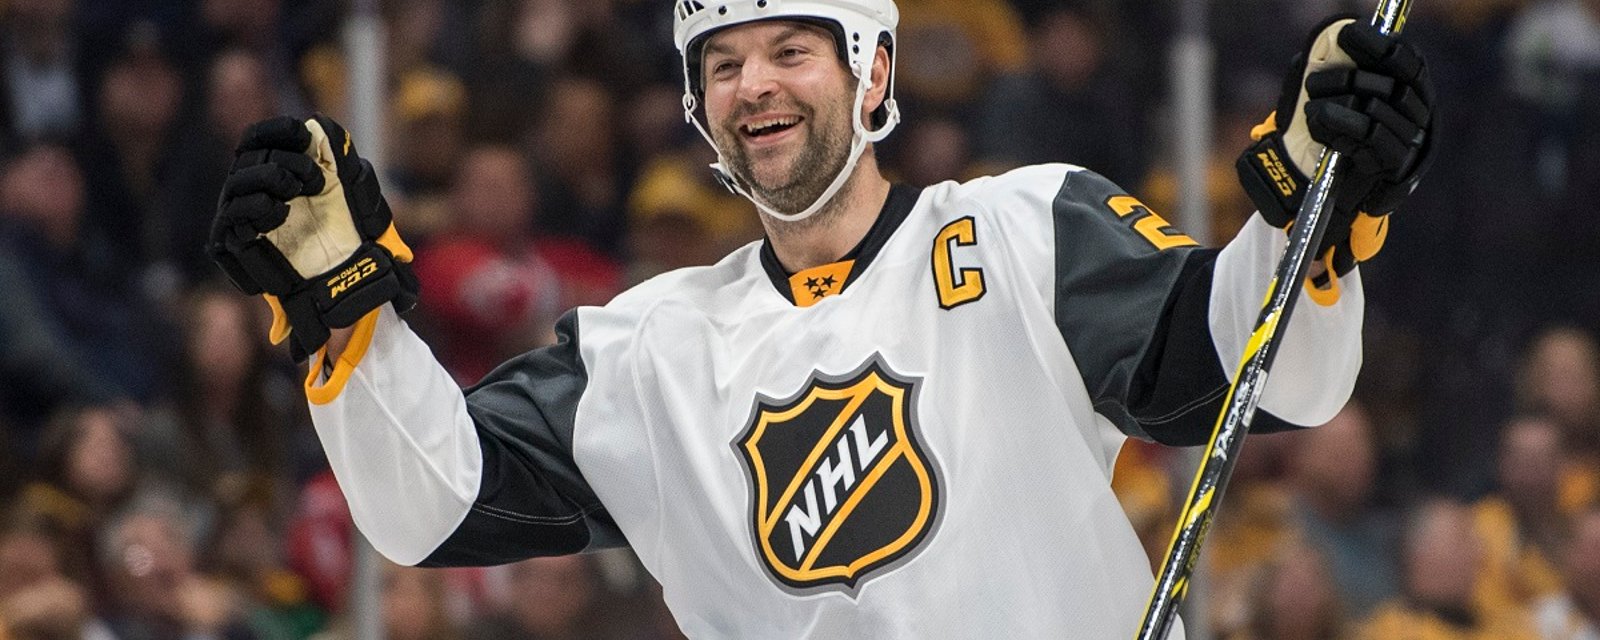 Breaking: John Scott reveals why he called P.K. Subban “a piece of garbage.”